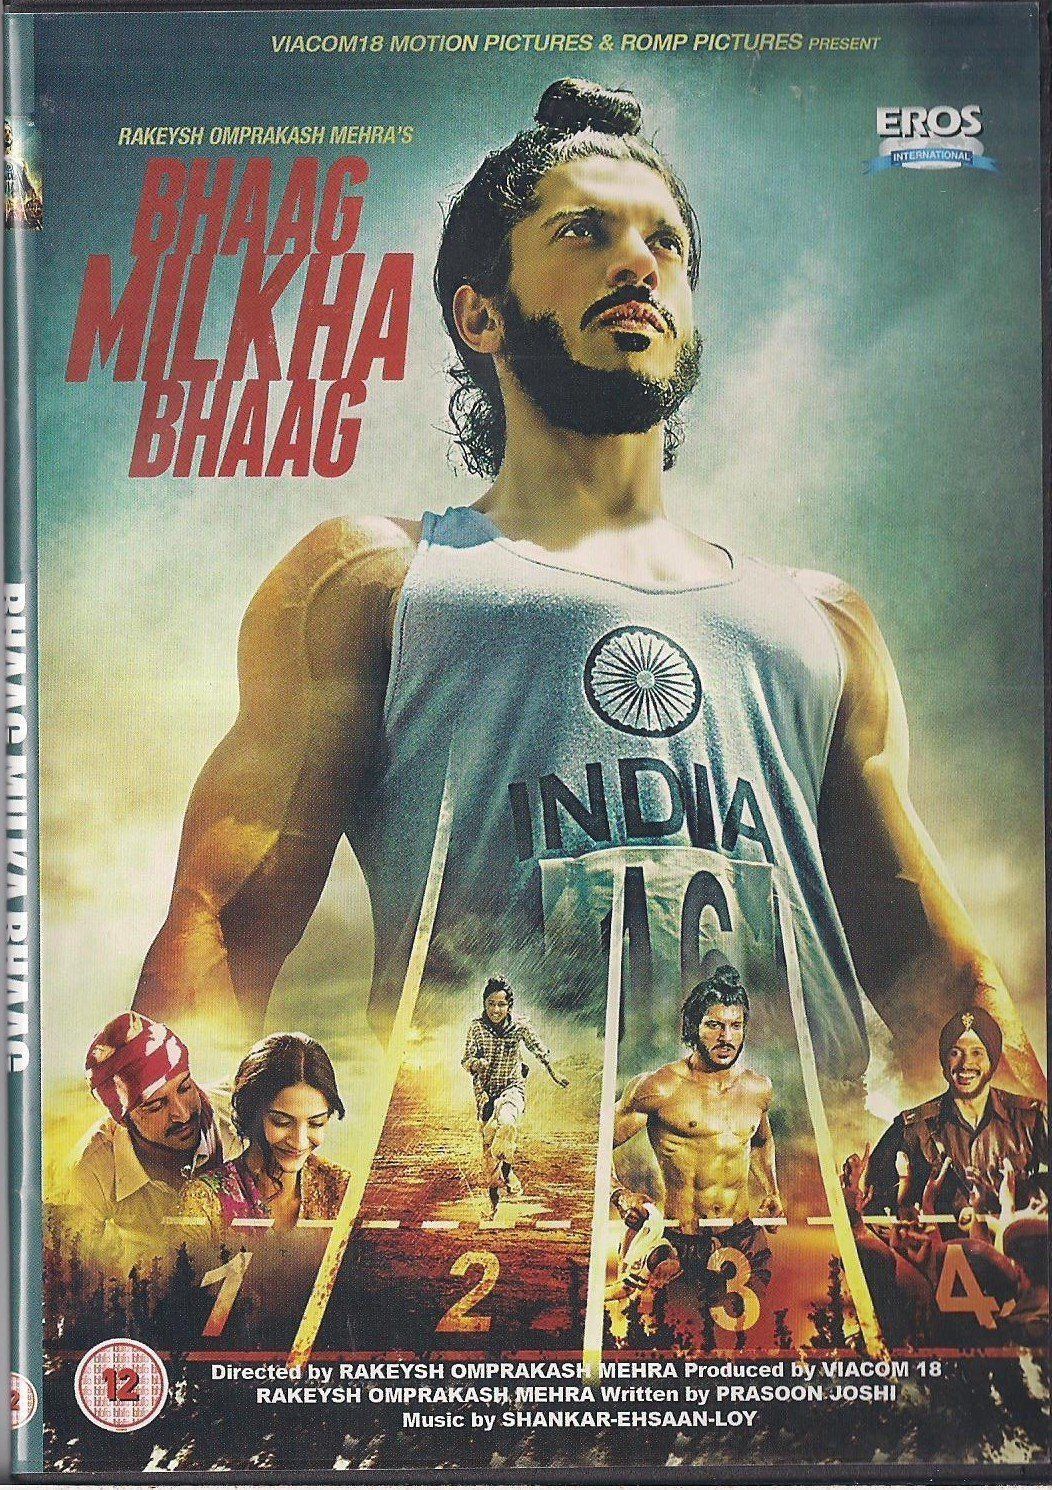 download full movie bhaag milkha bhaag in 3gp